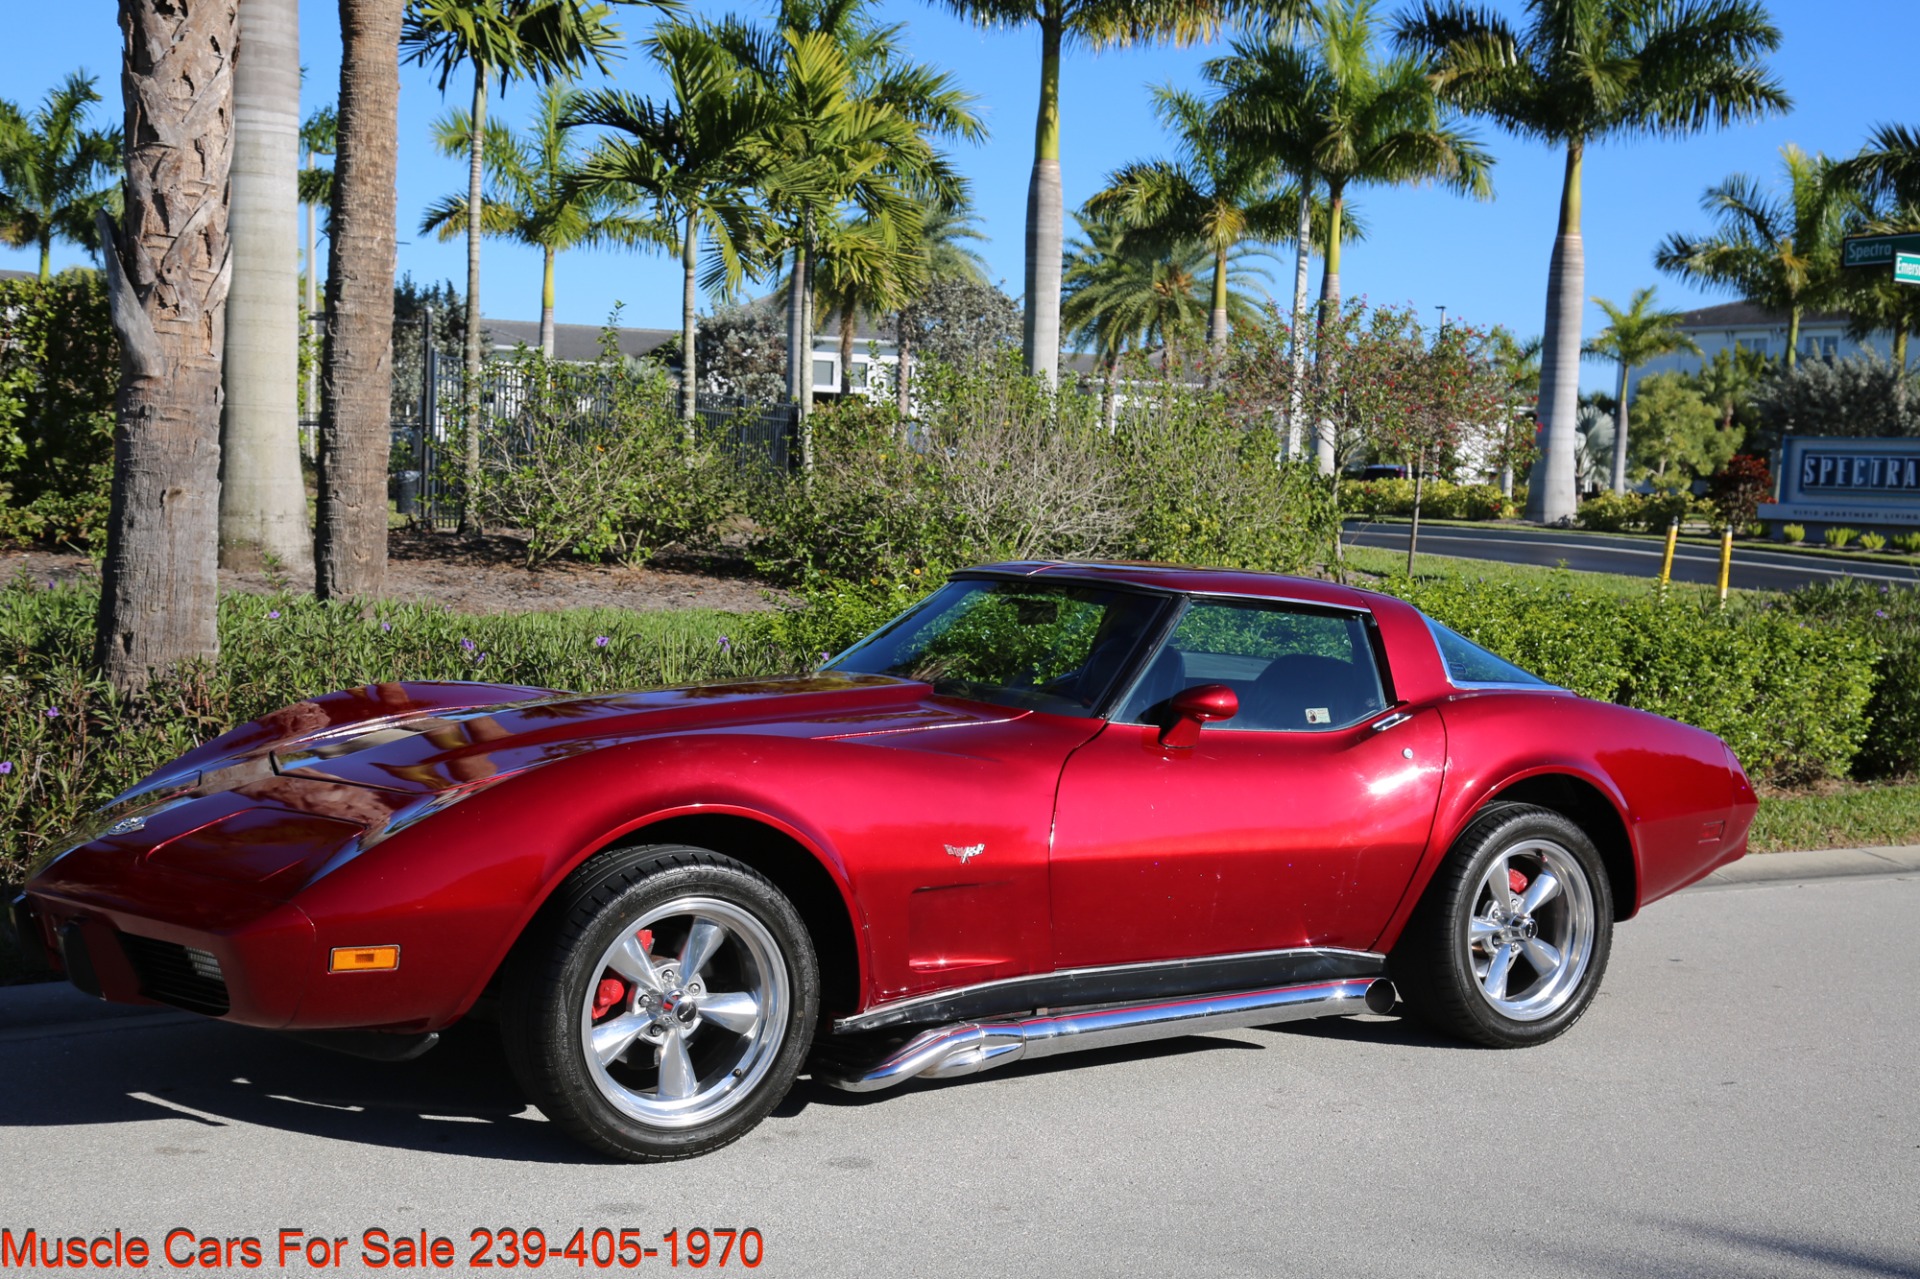 Used 1978 Chevrolet Corvette Anniversary Edition for sale $21,000 at Muscle Cars for Sale Inc. in Fort Myers FL 33912 6